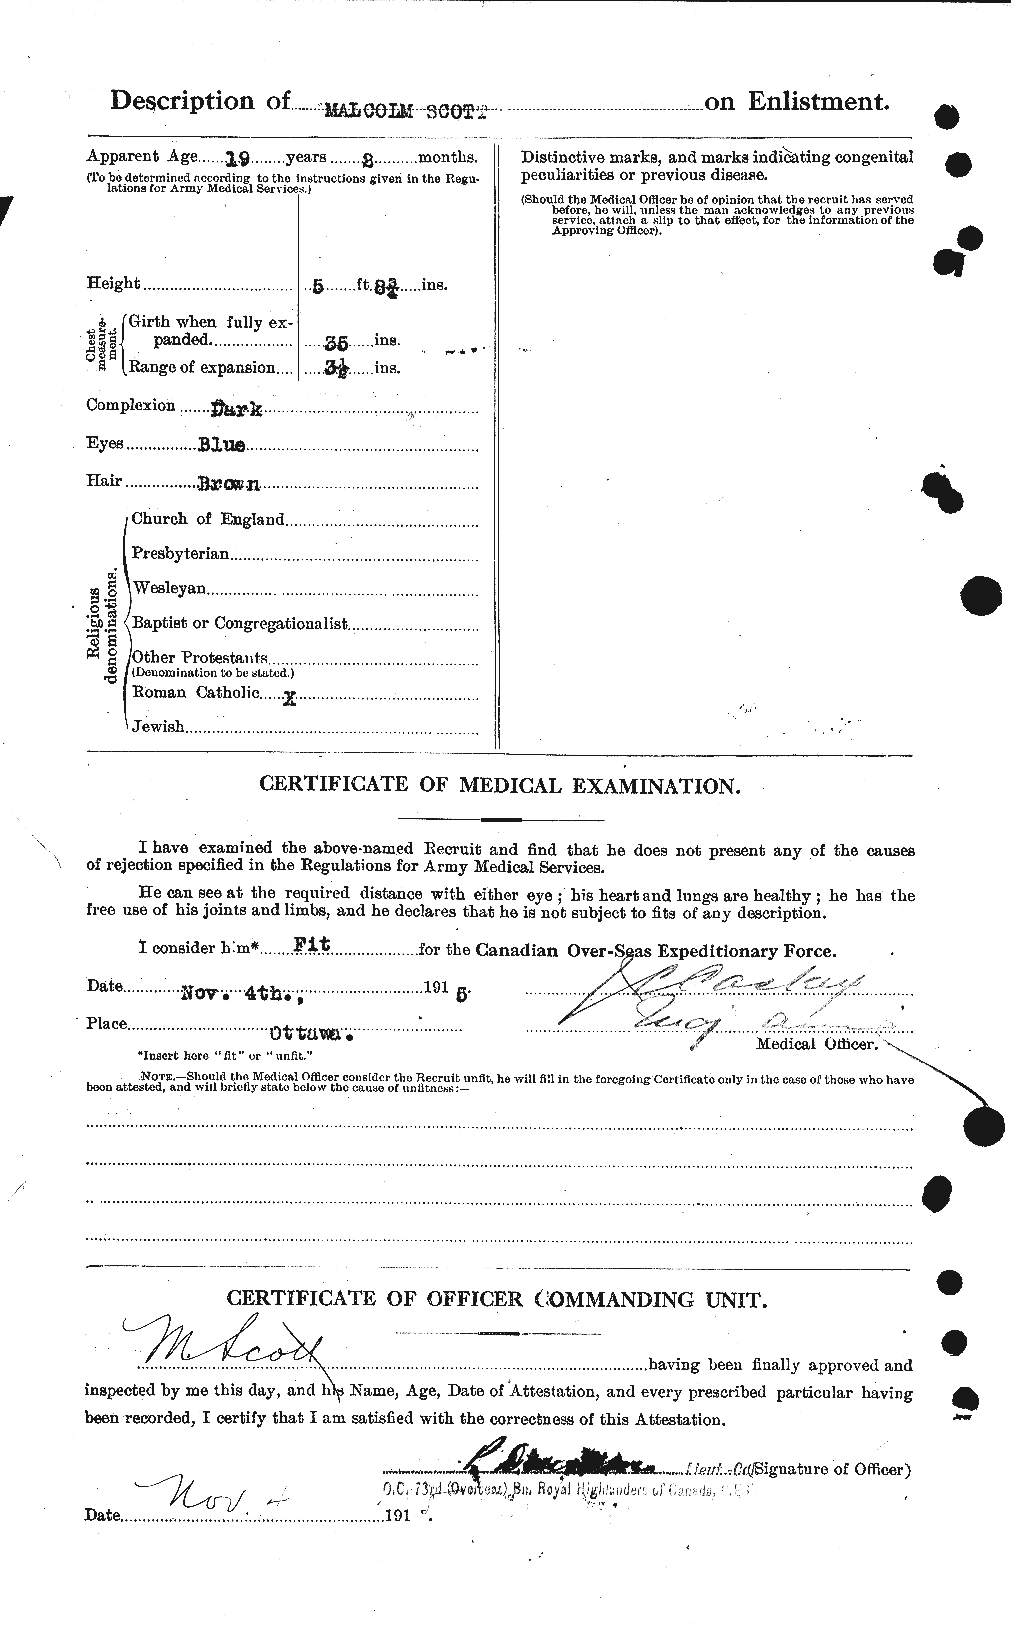 Personnel Records of the First World War - CEF 083519b